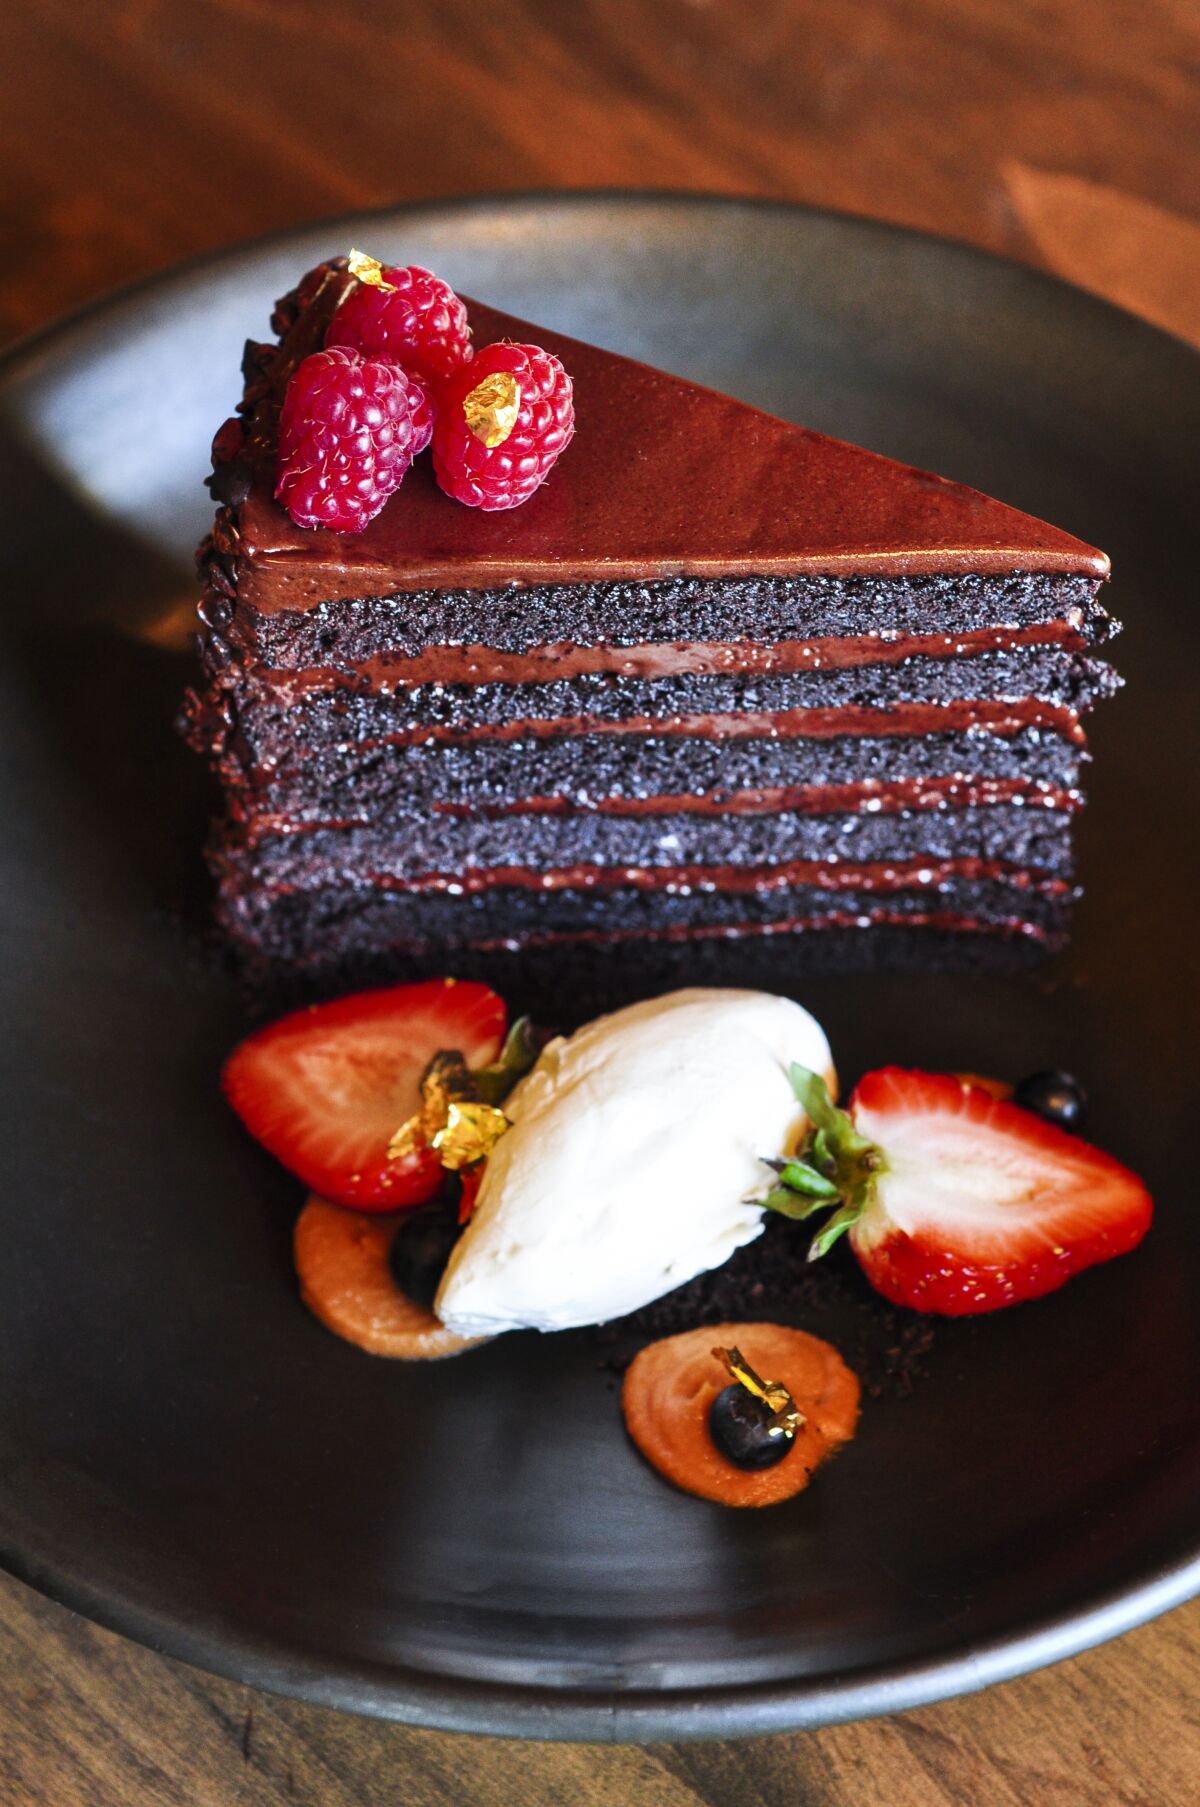 Rancho Valencia's Chocolate Layer Cake comes with gold flakes.